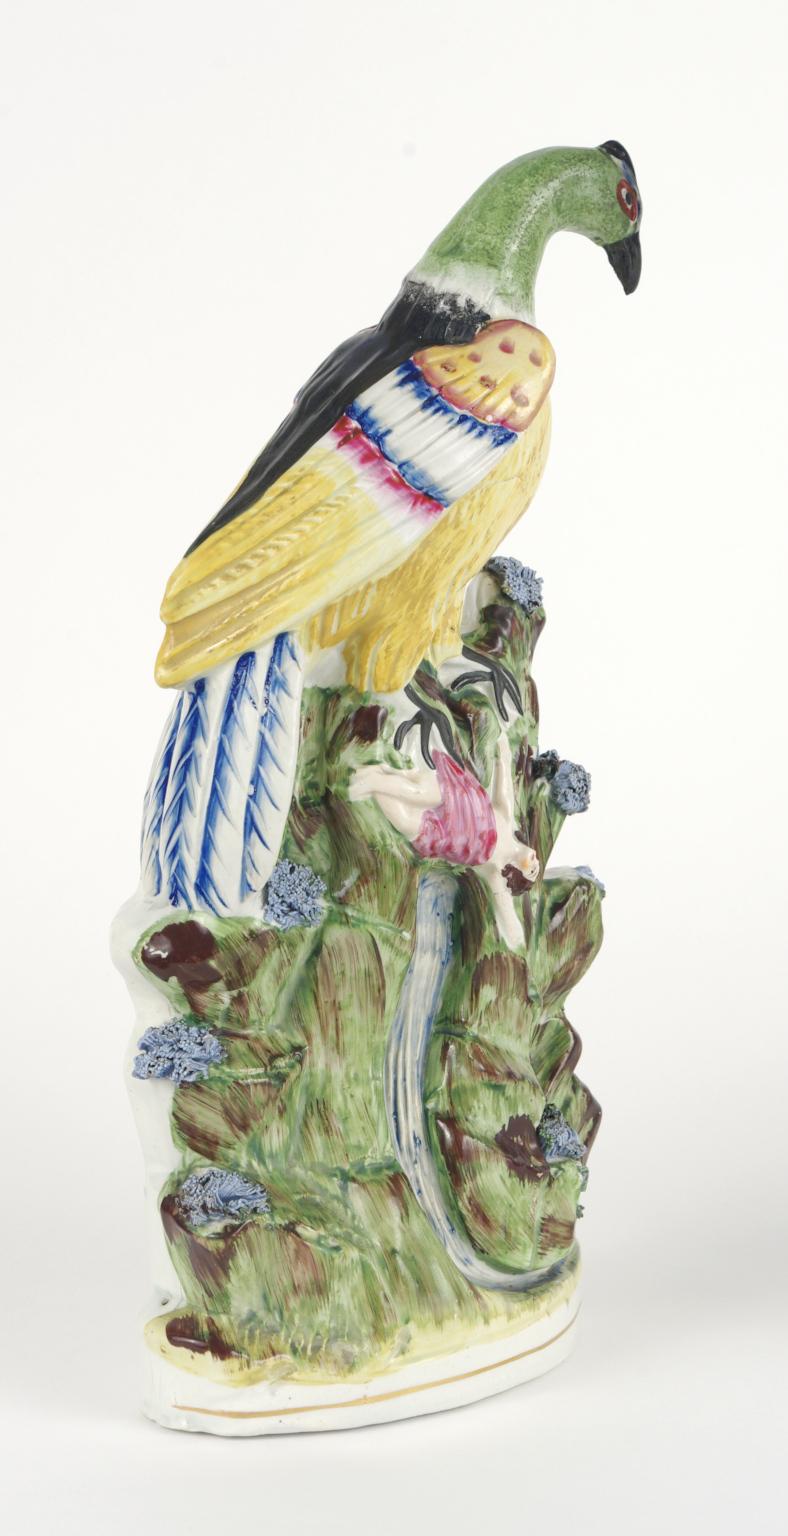 Staffordshire figure, depicting an enormous brightly painted bird dangling a woman over a waterfall.

It has been suggested the subject of this harrowing group is the fabled Roc bird of 